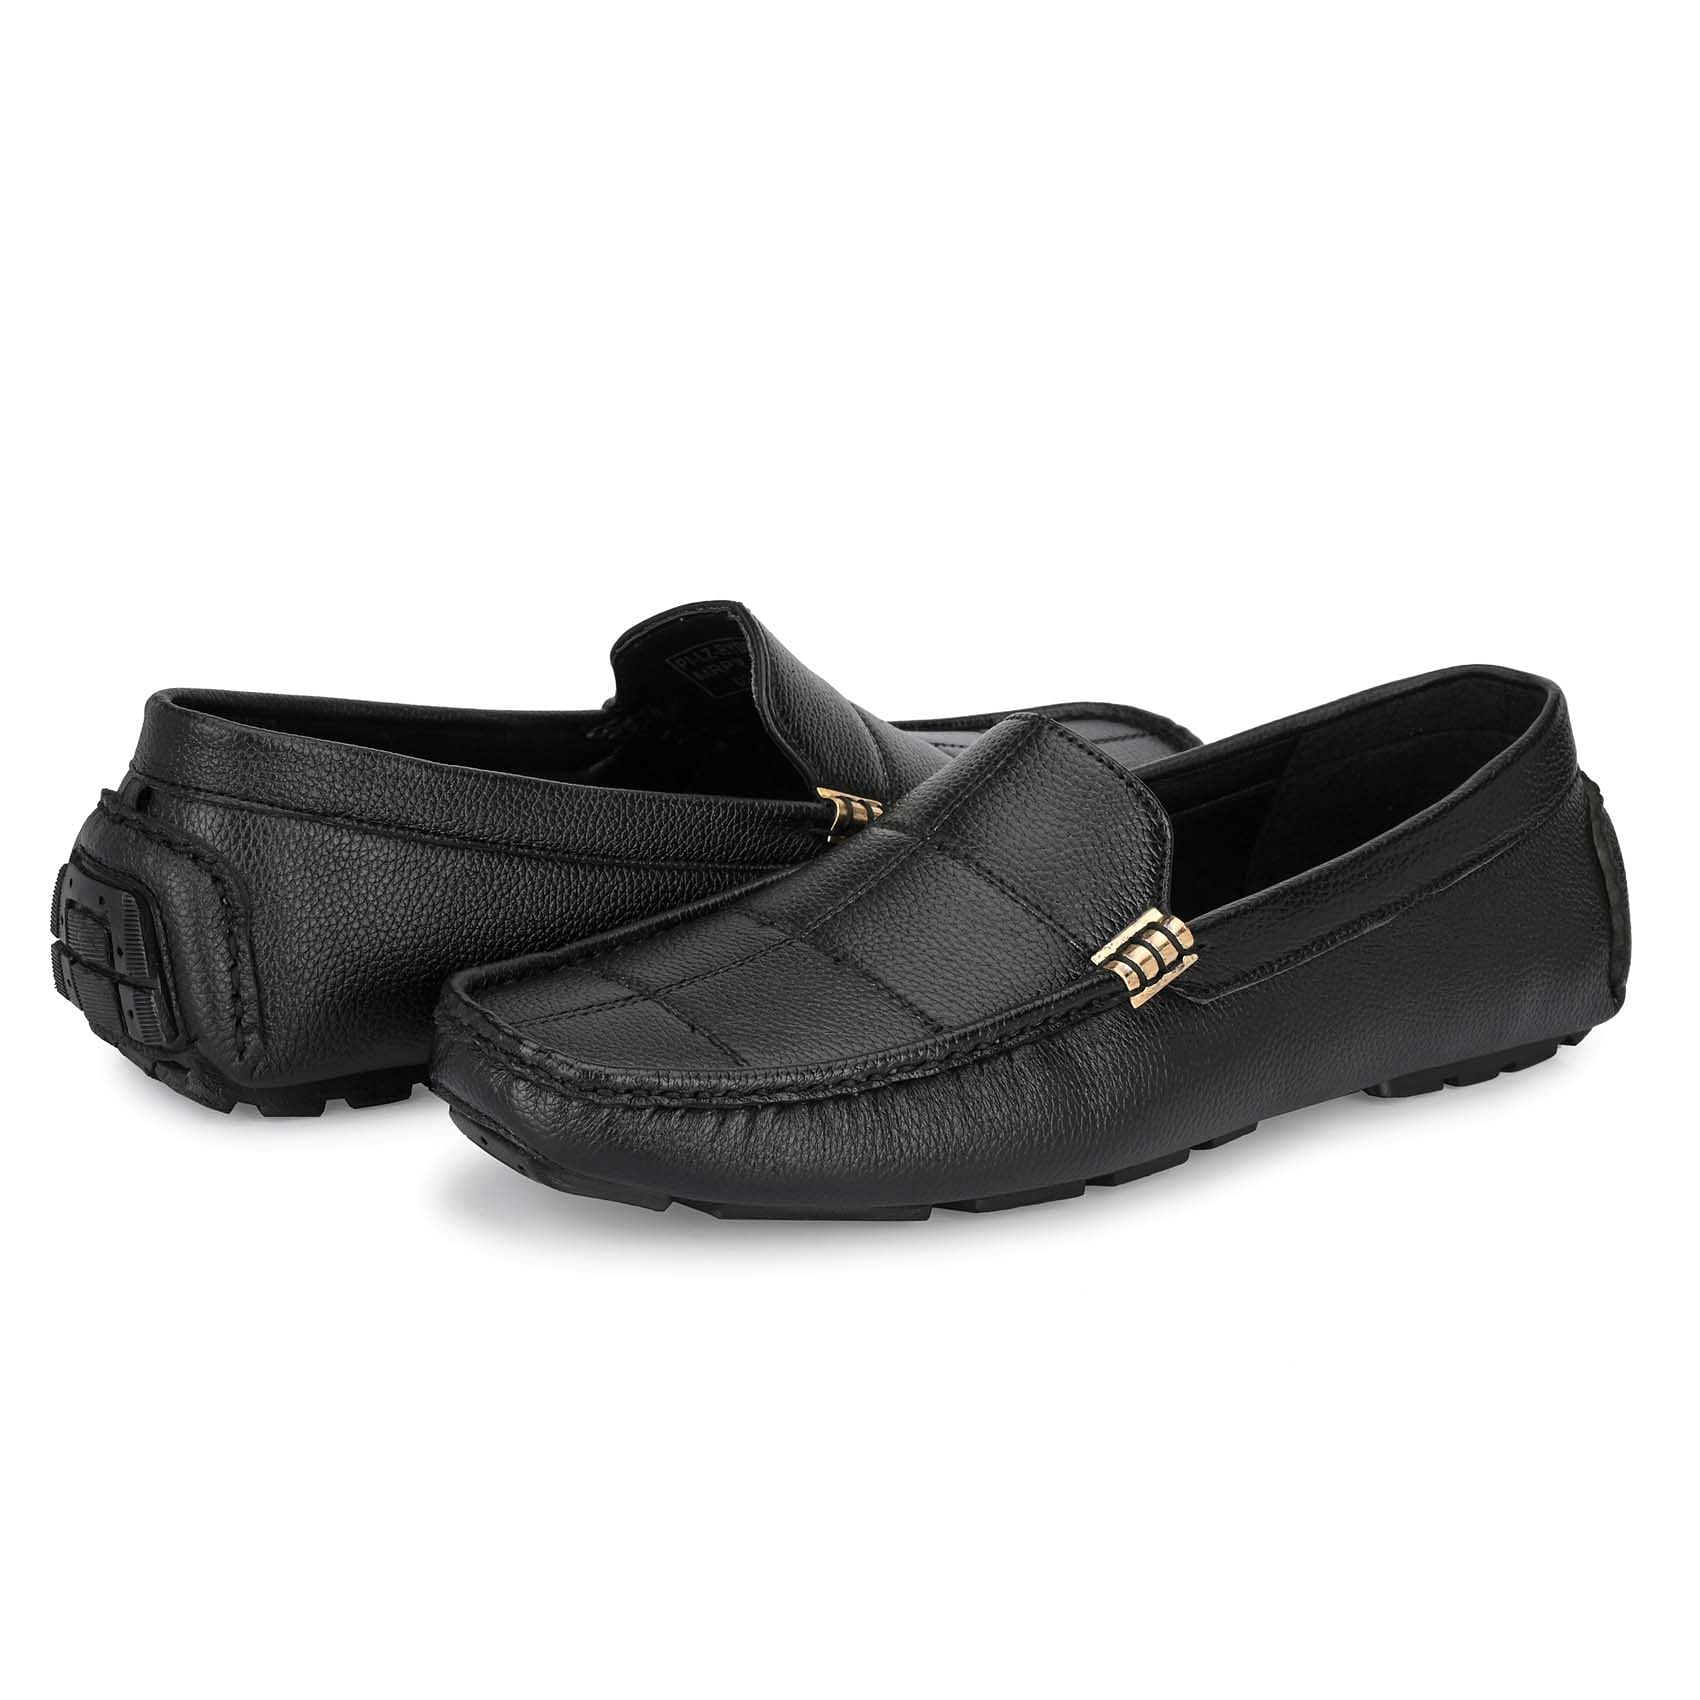 Pair-it Men's Loafers Shoes - Black-LZ-Loafer111